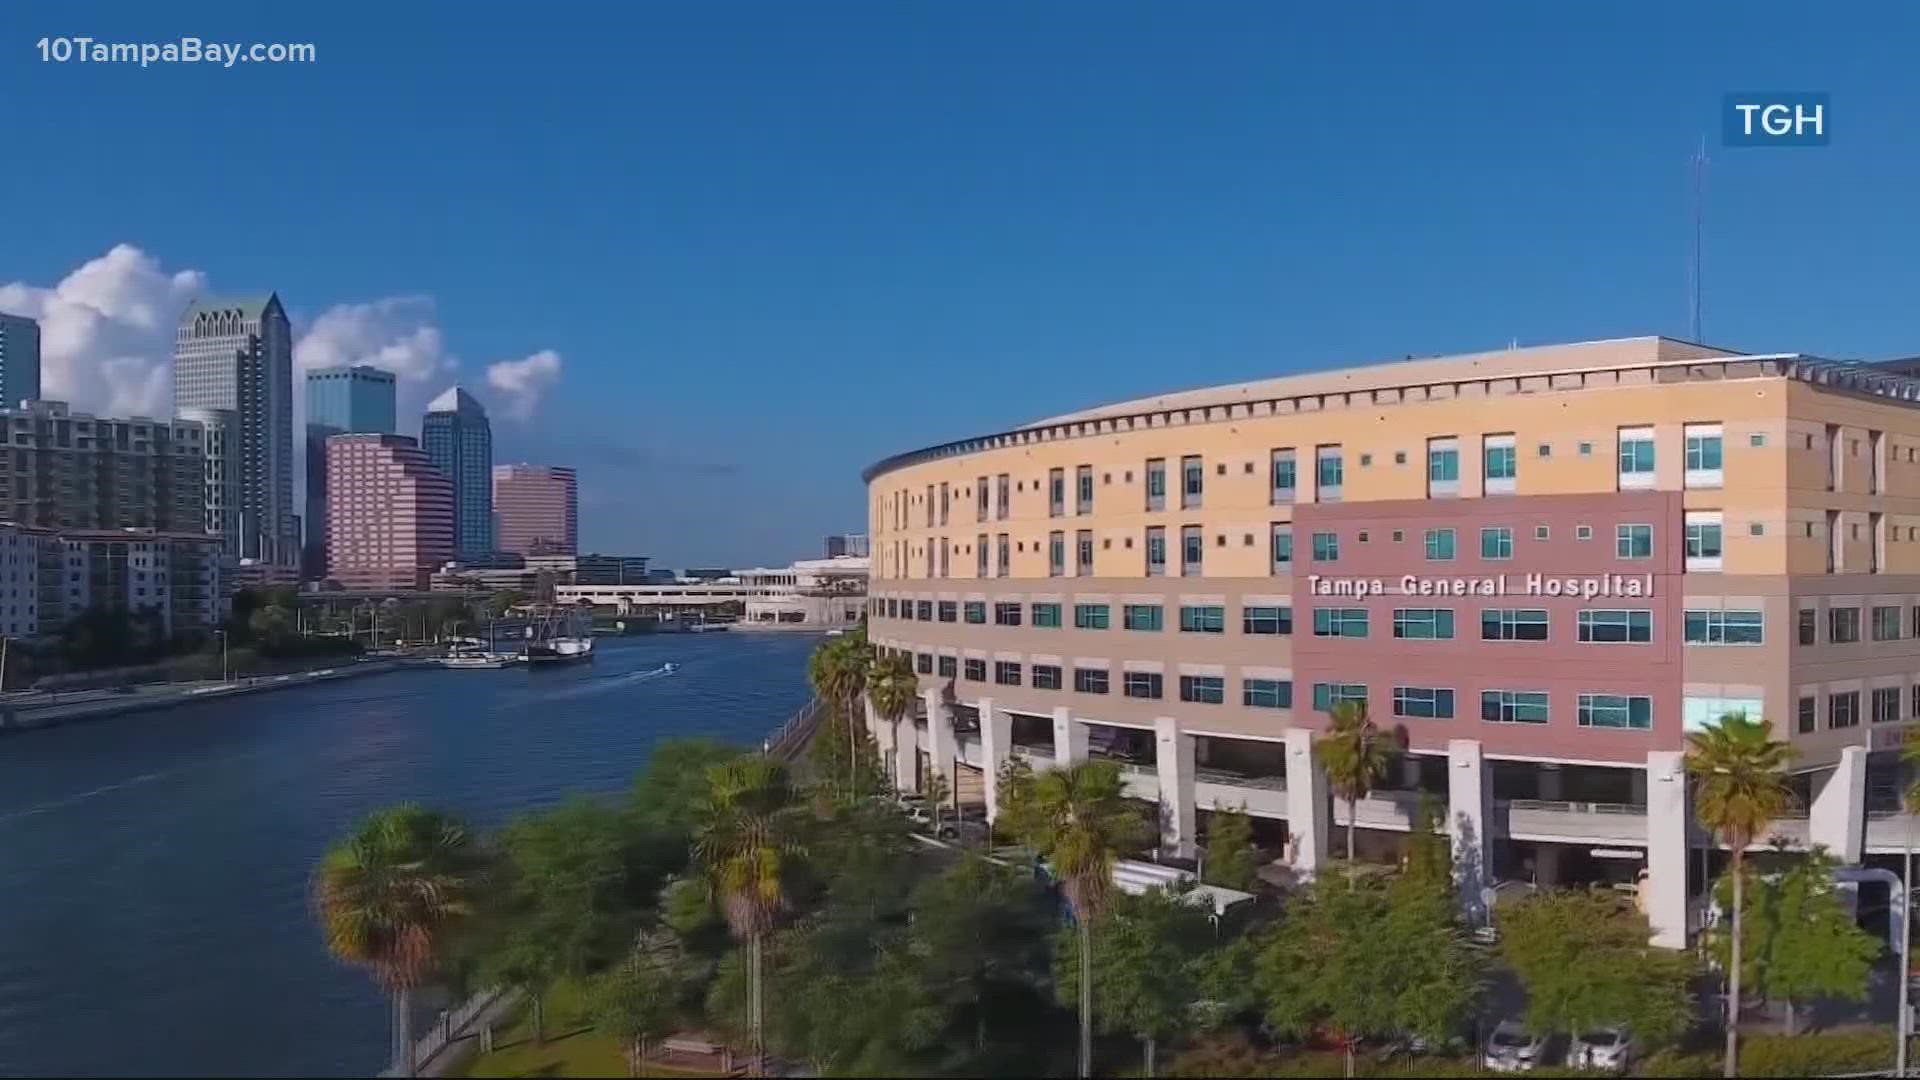 The chief medical officer at Tampa General Hospital helps give answers to some questions many people have asked.